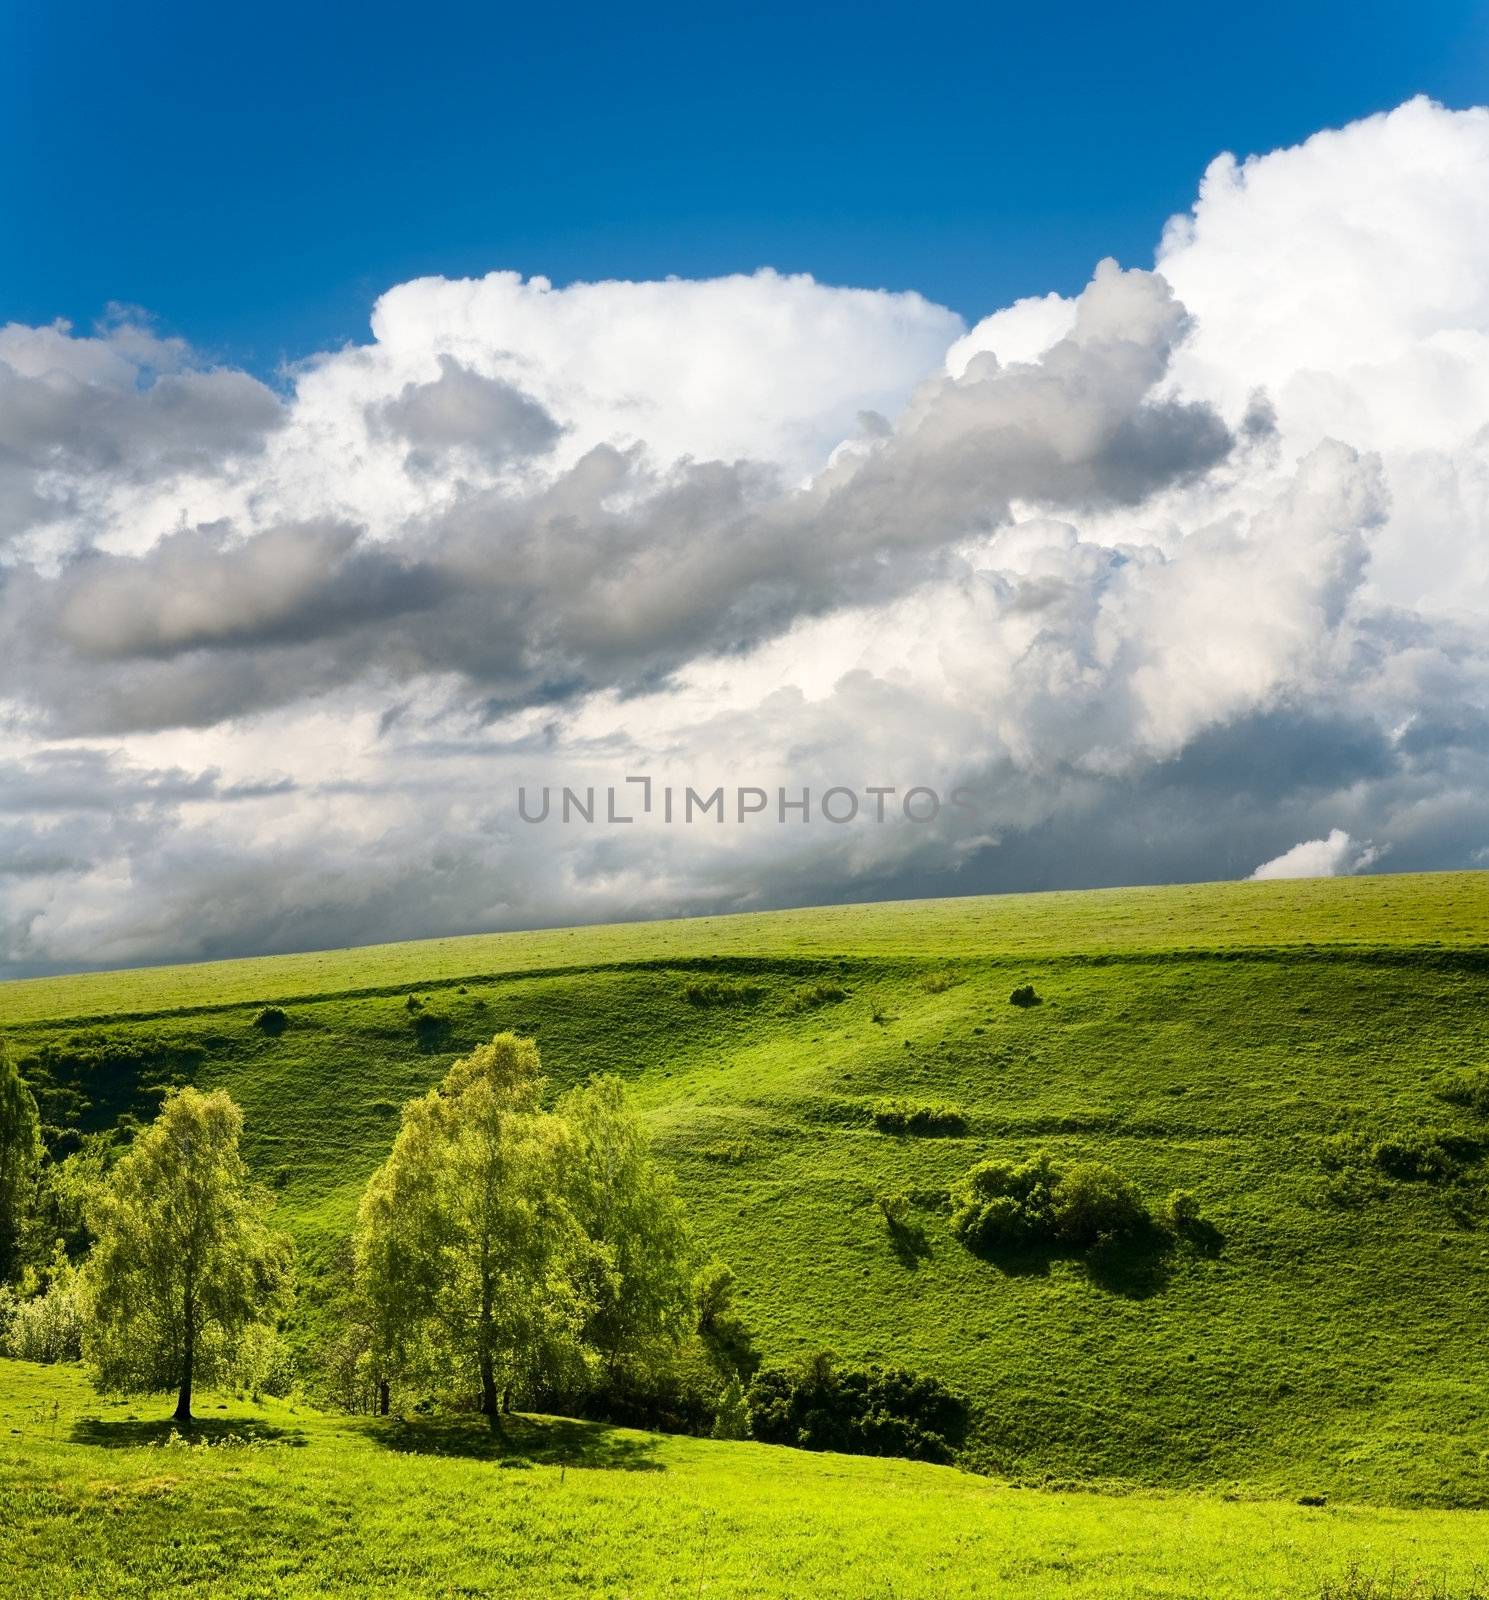 The white clouds in the blue sky green grass by a393978551